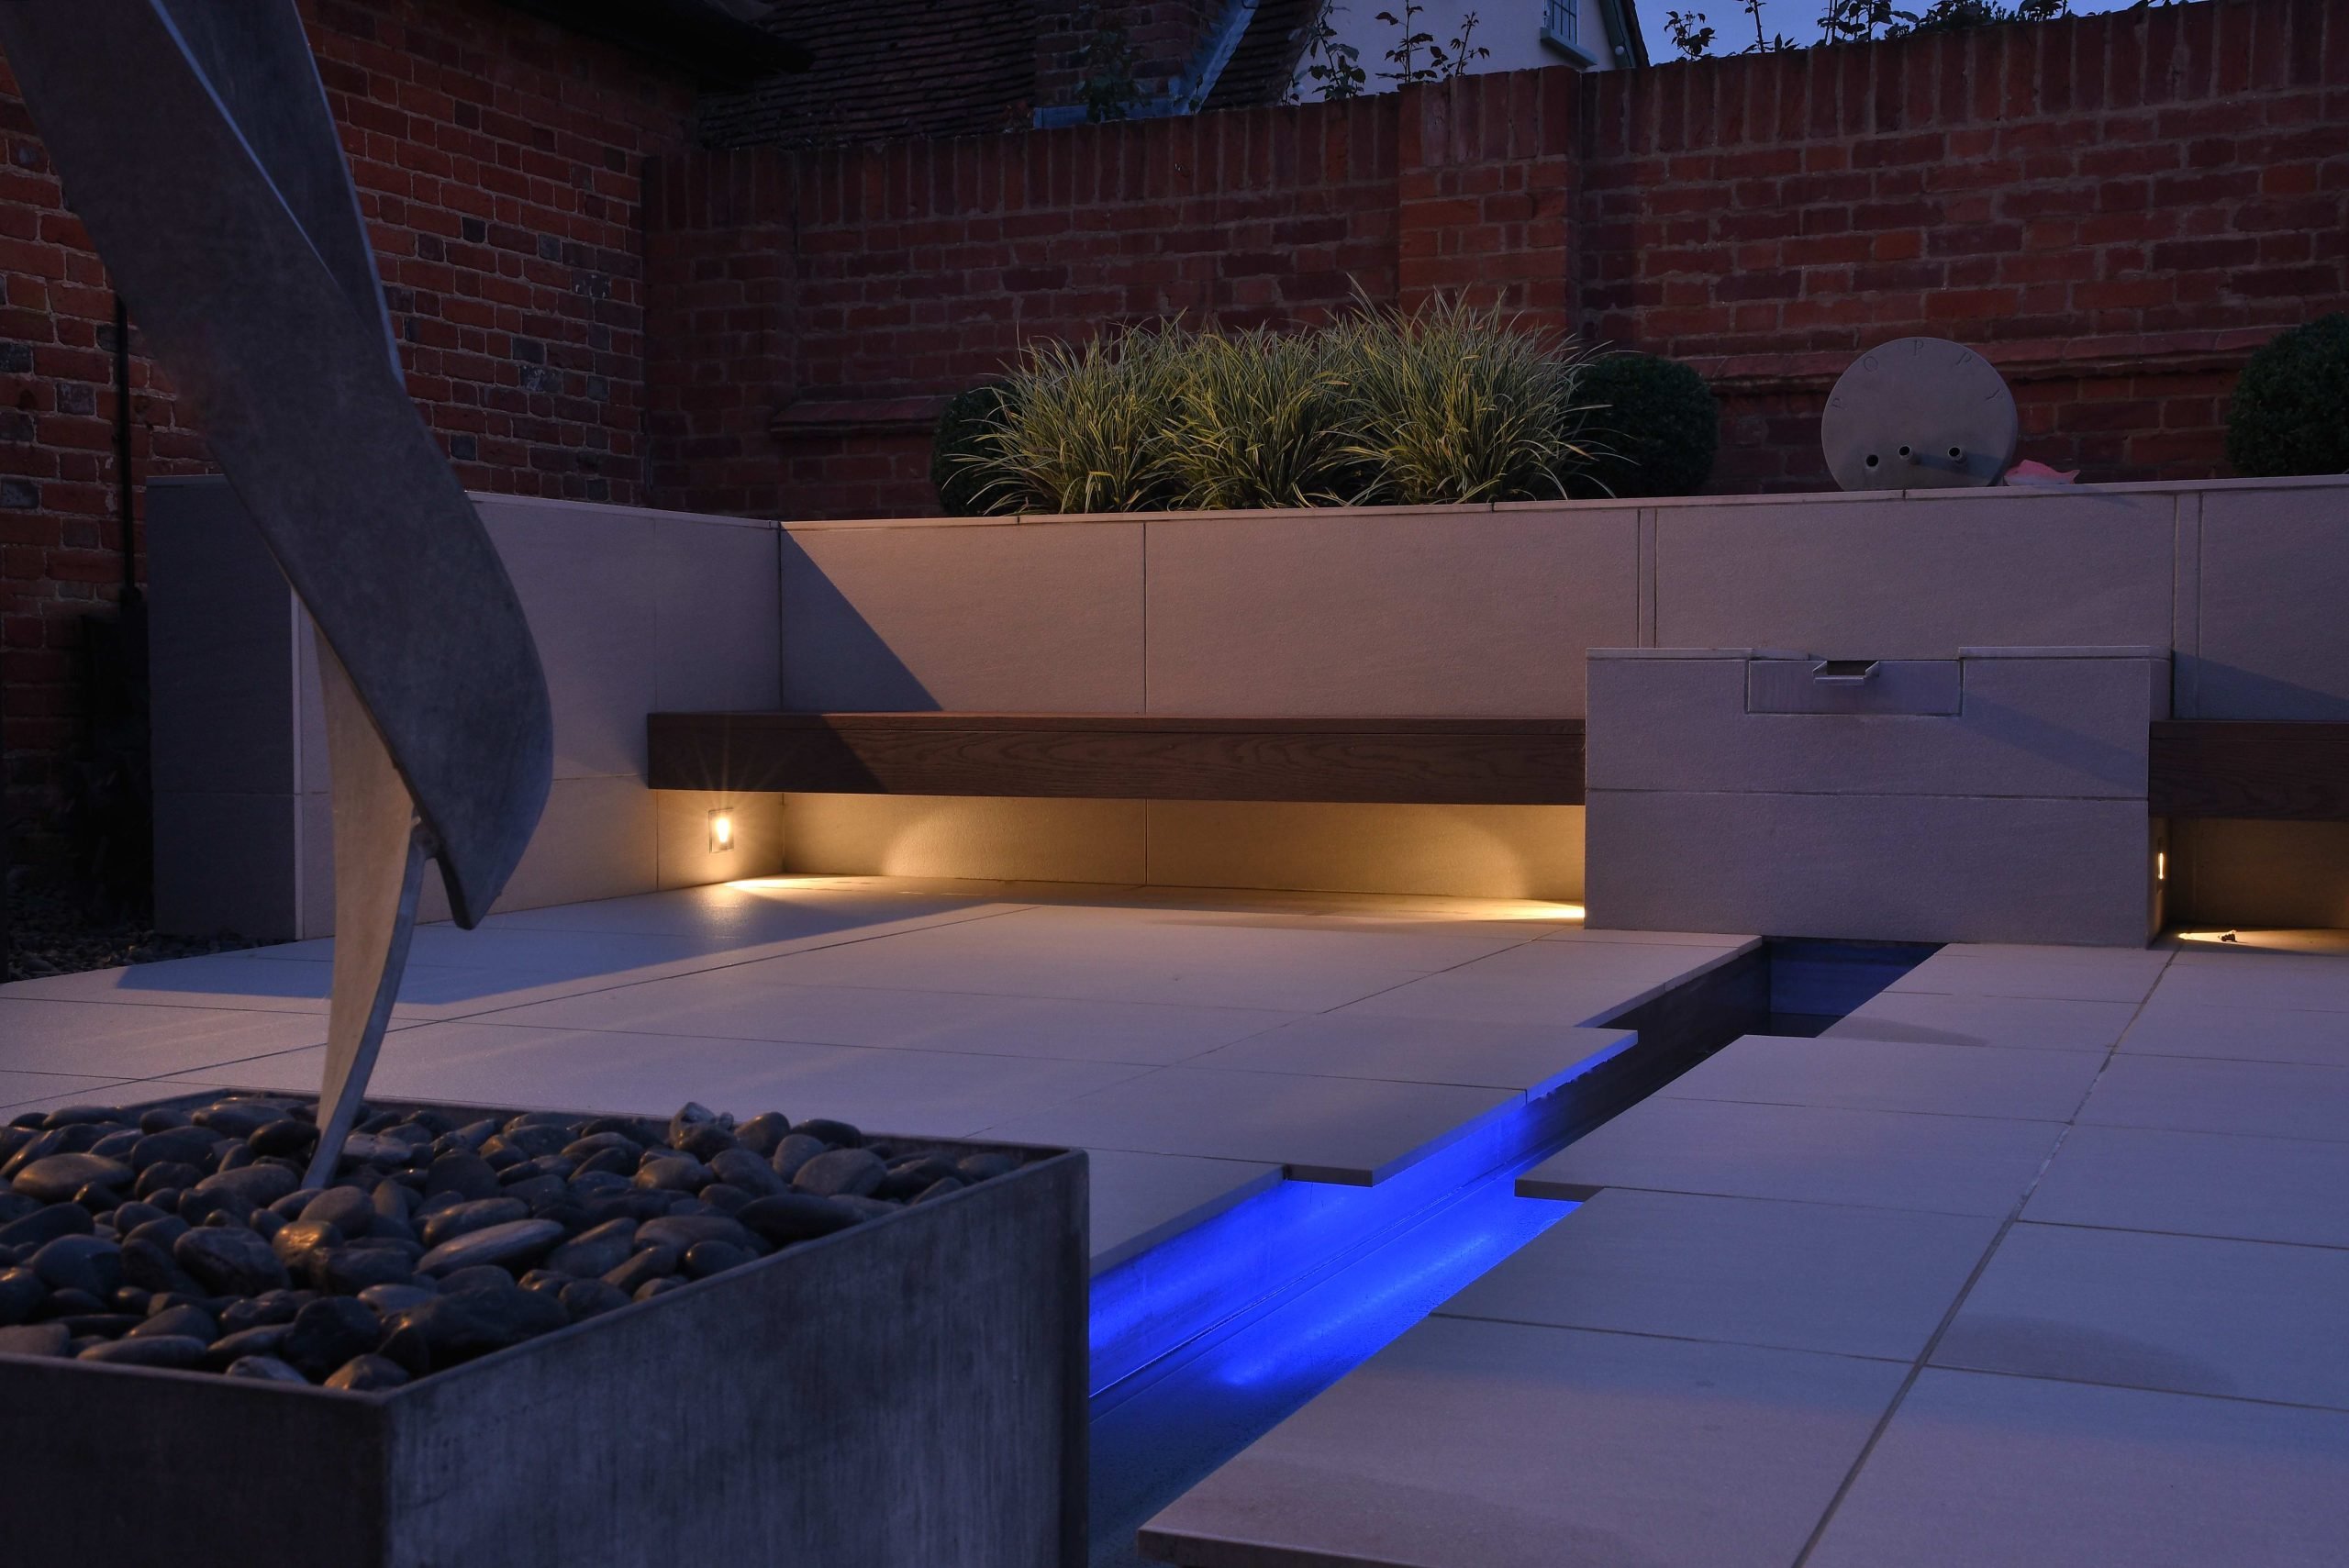 6 Things to Consider When Buying Outdoor Lighting